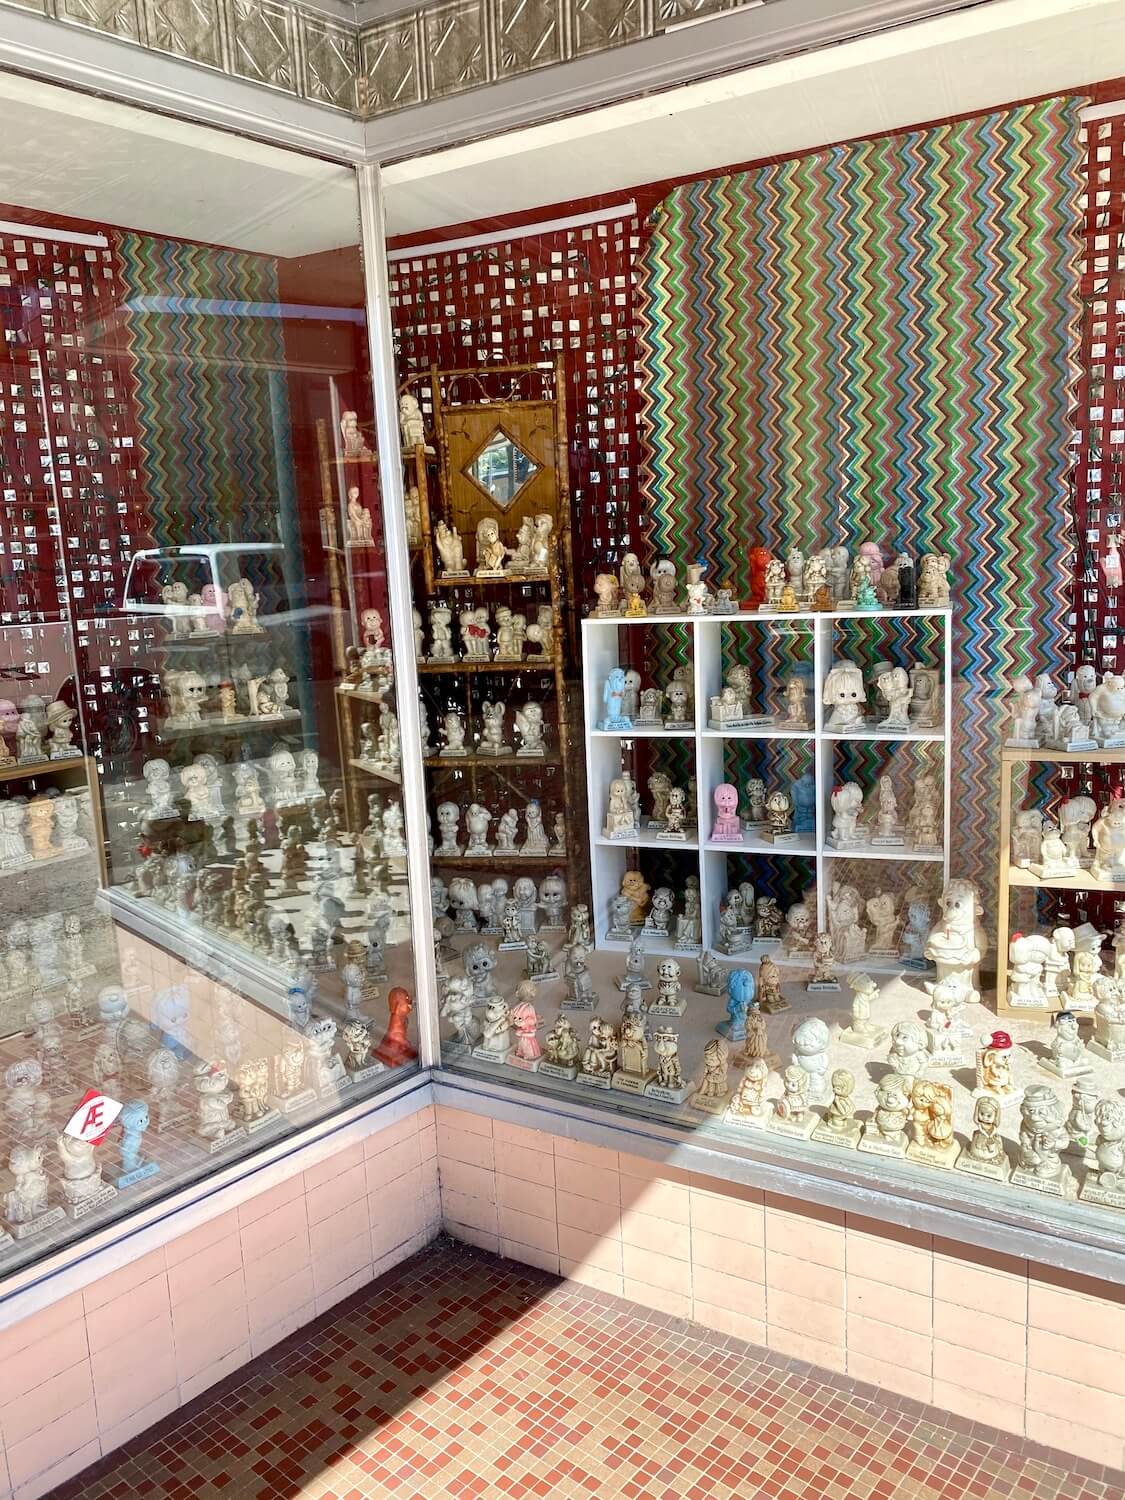 Window shopping is a fun thing to do in Astoria, Oregon and this shop displays hundreds of small kitschy figurines in the window as a beam of sunshine graces the mosaic of the ground.